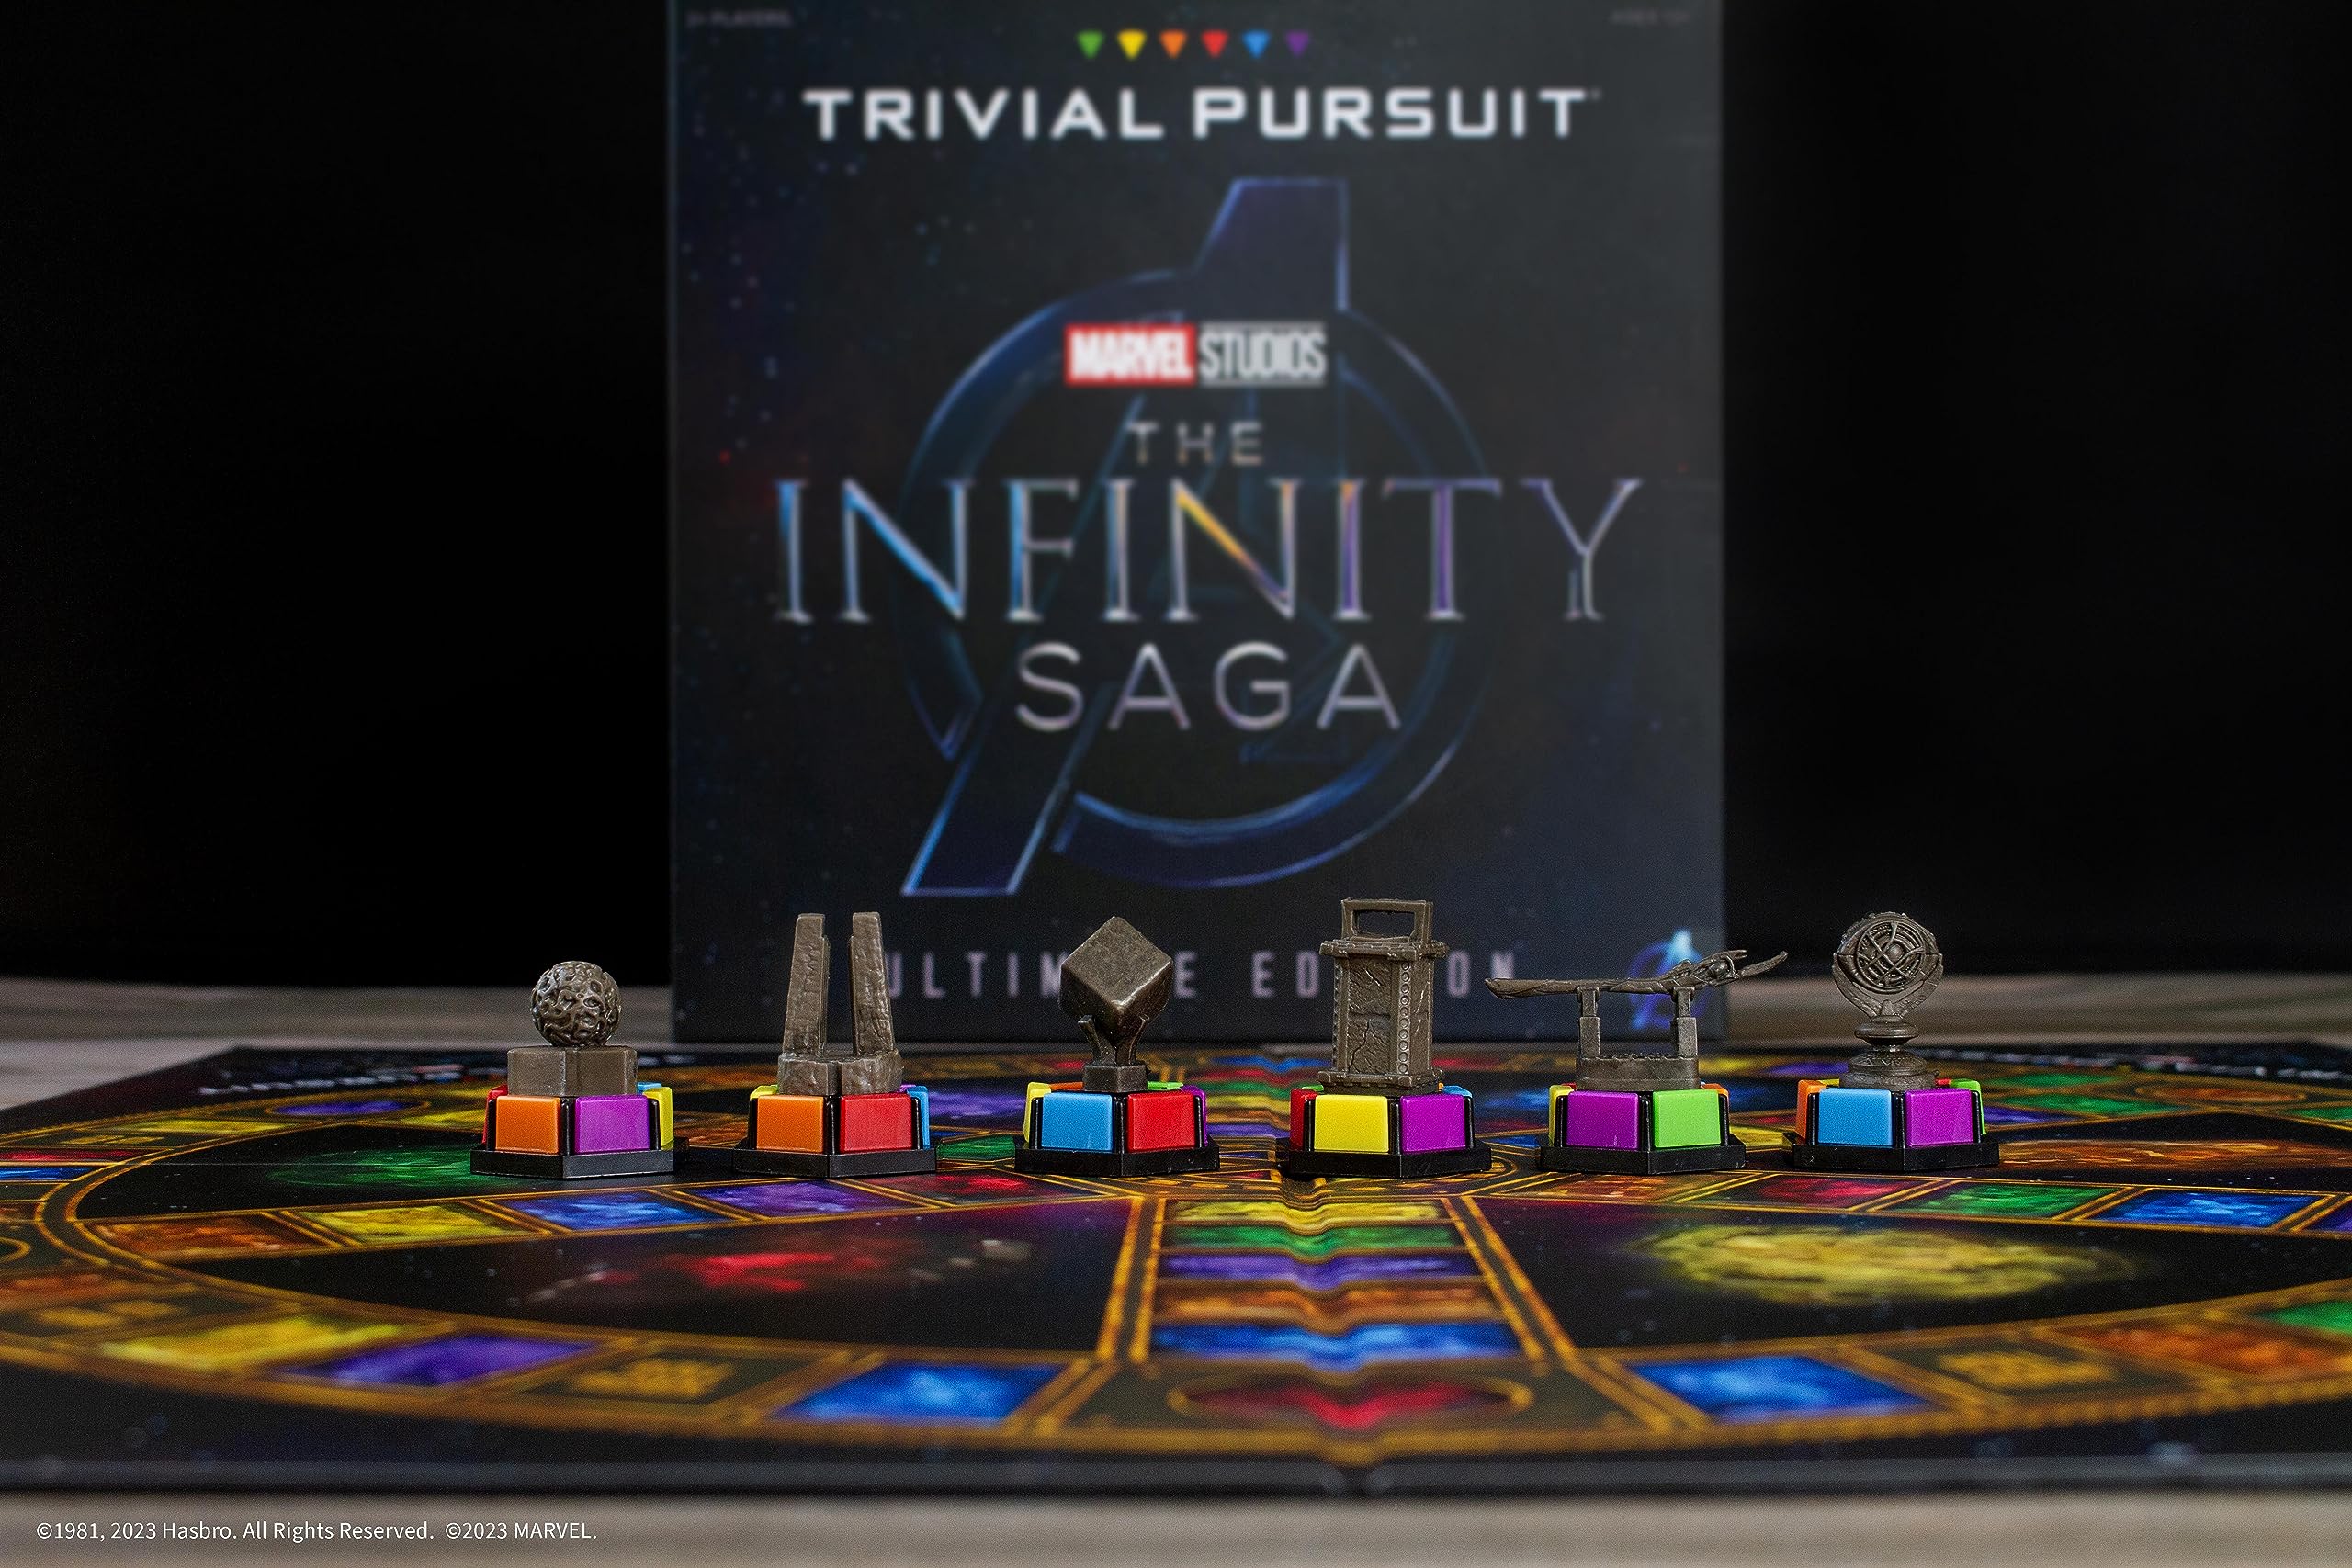 TRIVIAL PURSUIT: Marvel Cinematic Universe Ultimate Edition | Collectible Trivia Board Game Featuring 6 Infinity Stone Location Movers and 1800 Questions from MCU Phases 1-3